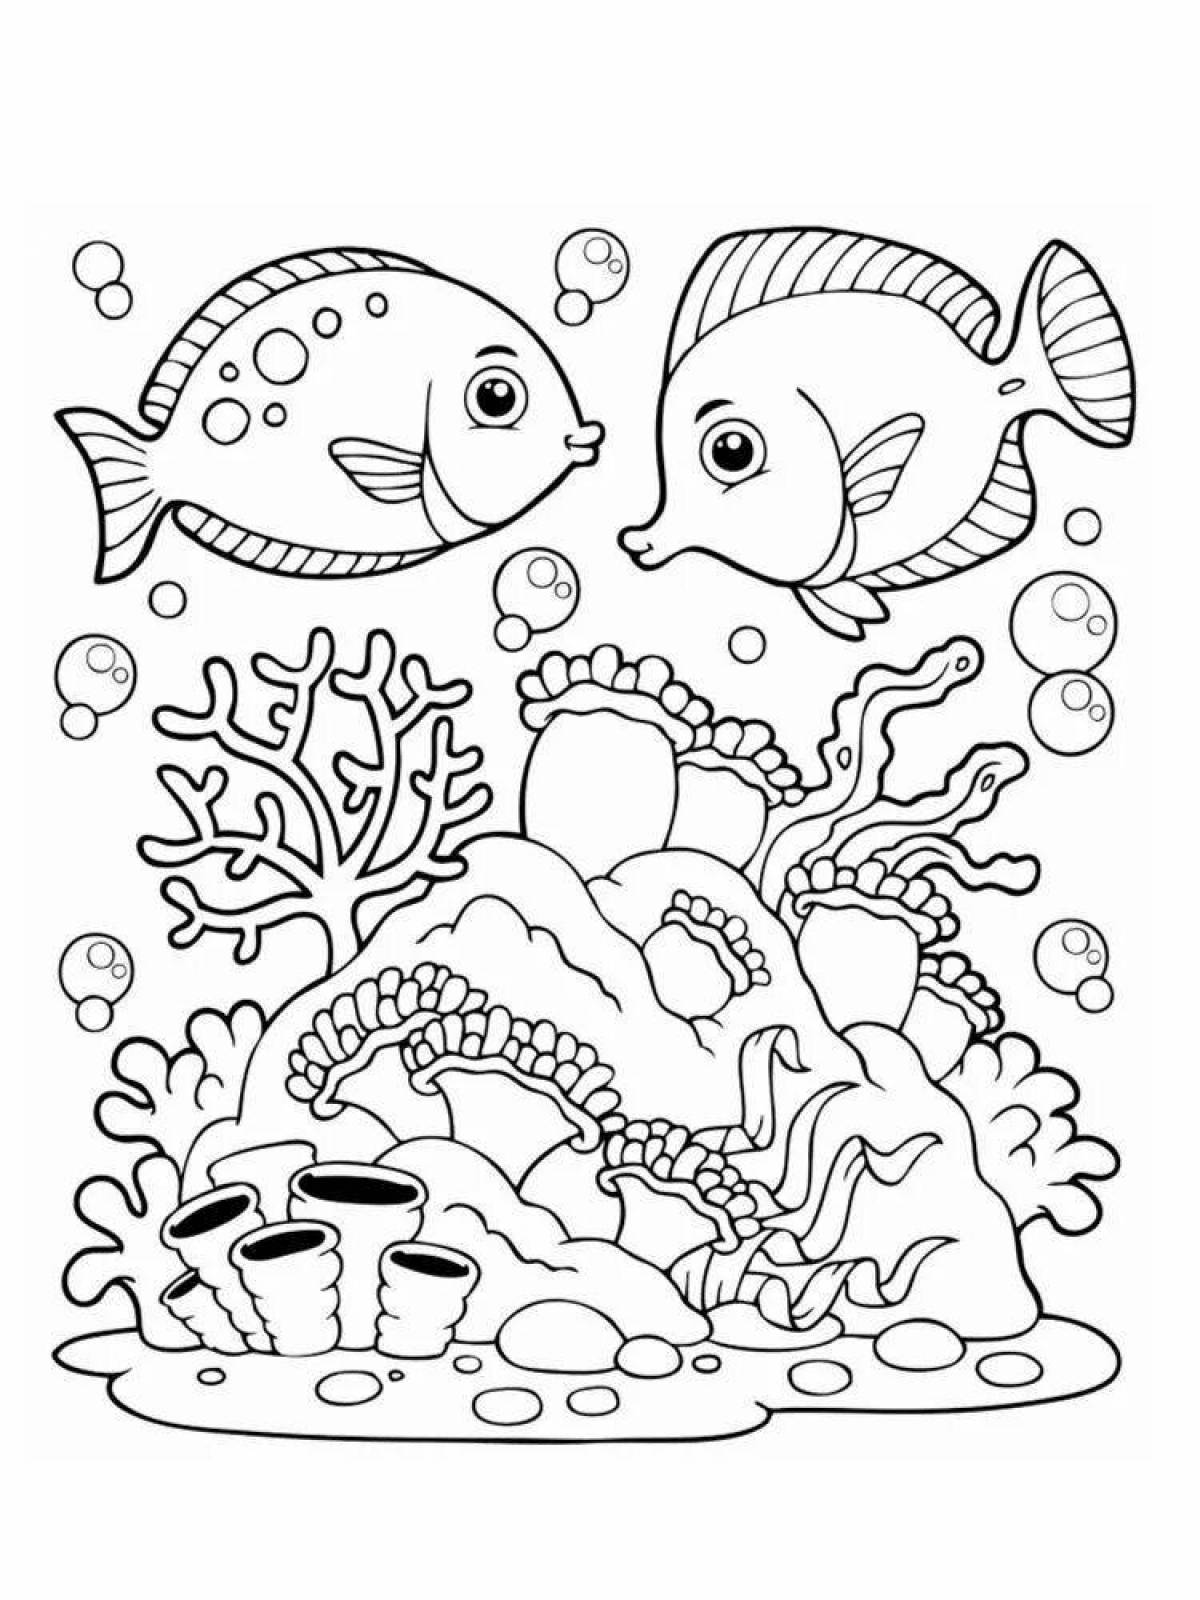 Playful coral coloring book for kids